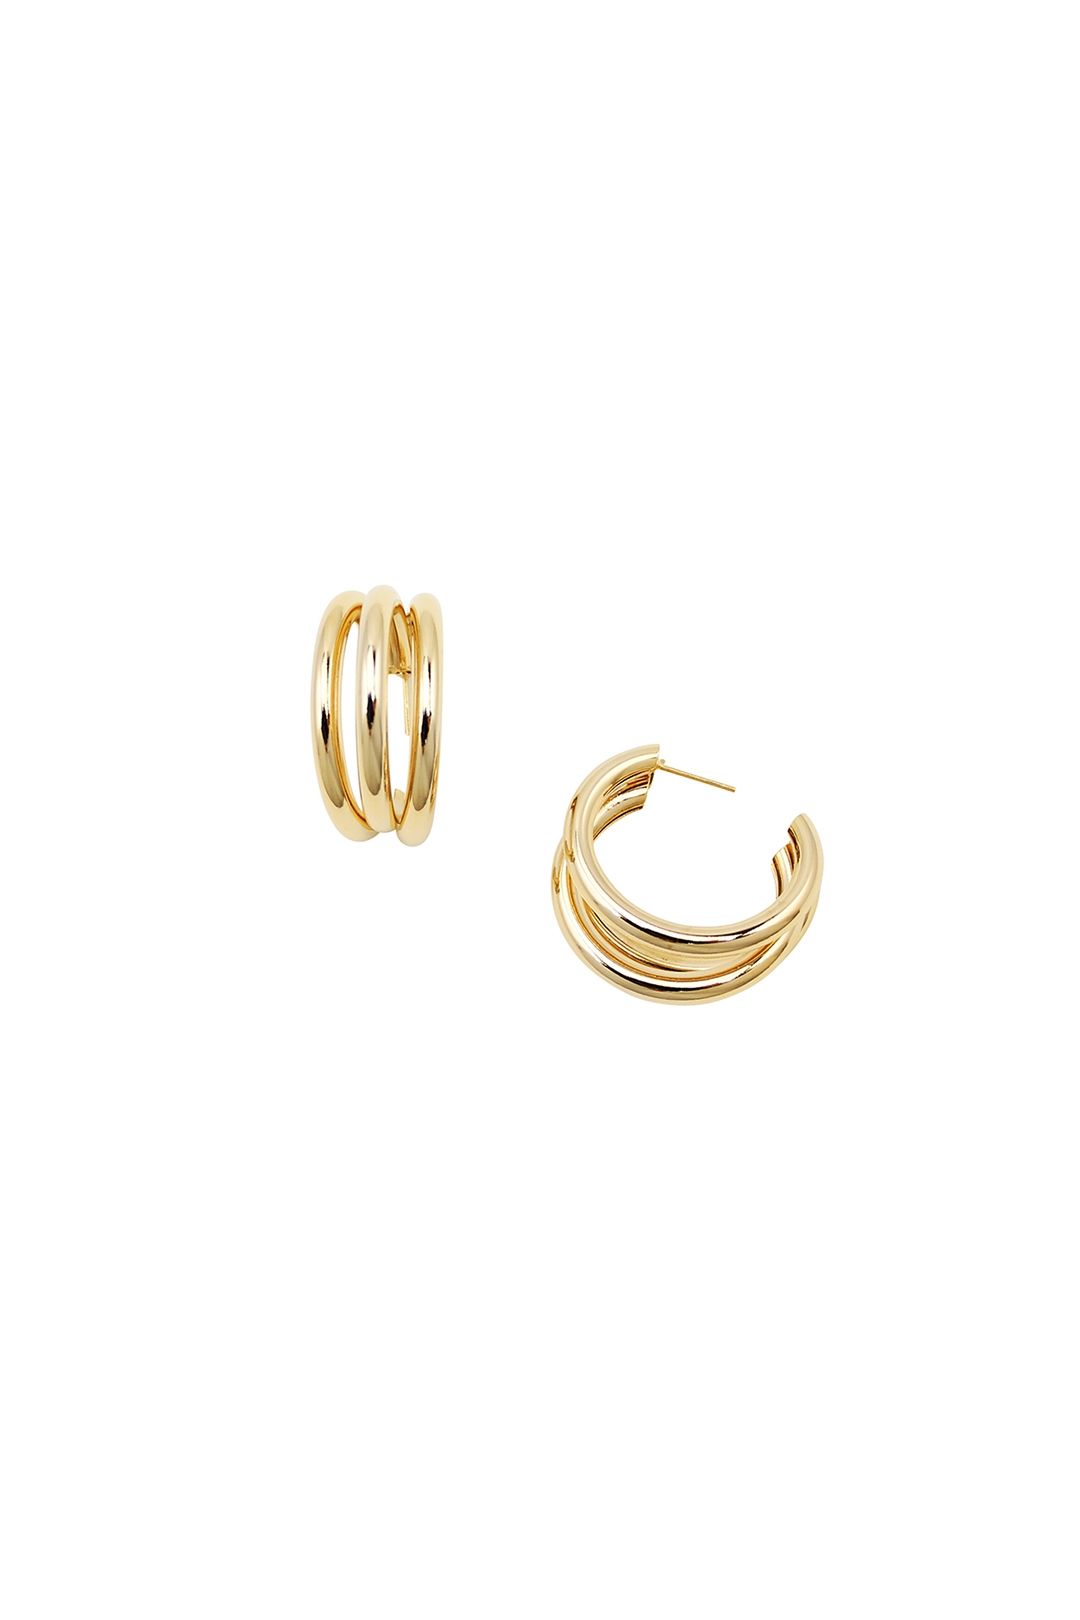 Jolie and Deen - Ally Hoop Earrings - Gold - Ghost Front